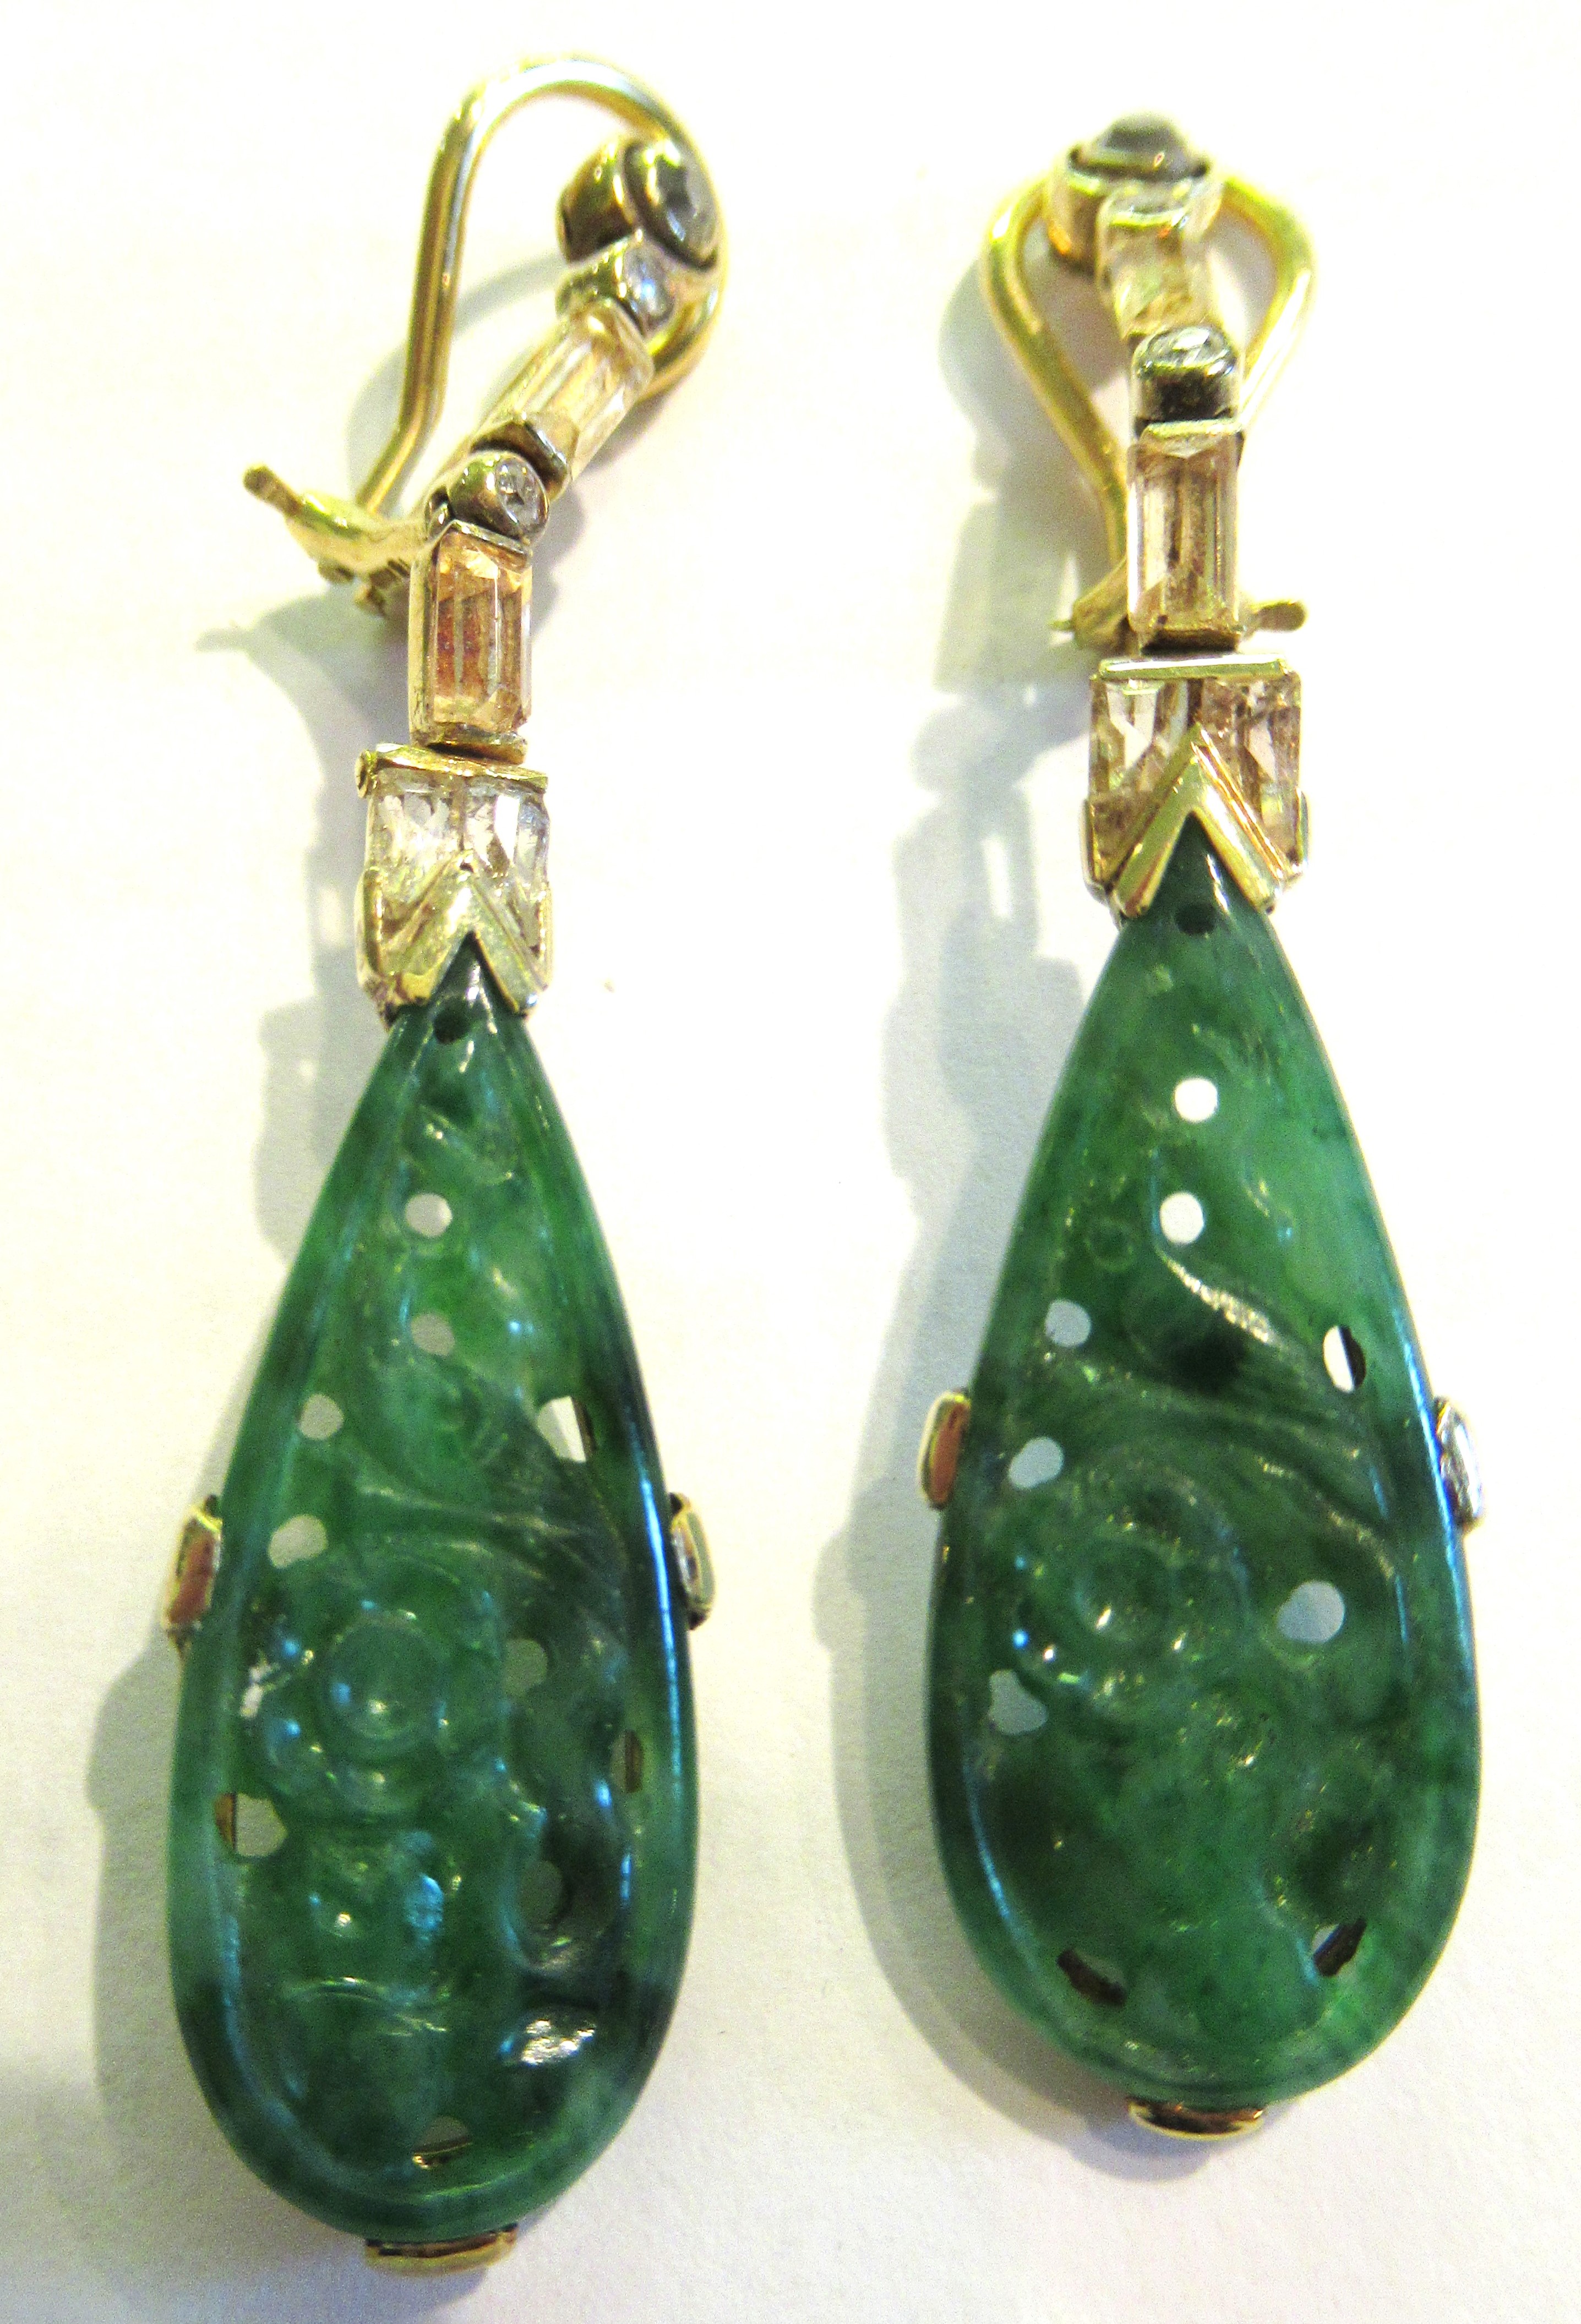 Pair of 18ct yellow gold diamond and carved jade drop earrings, 53mm in height, 8.8g